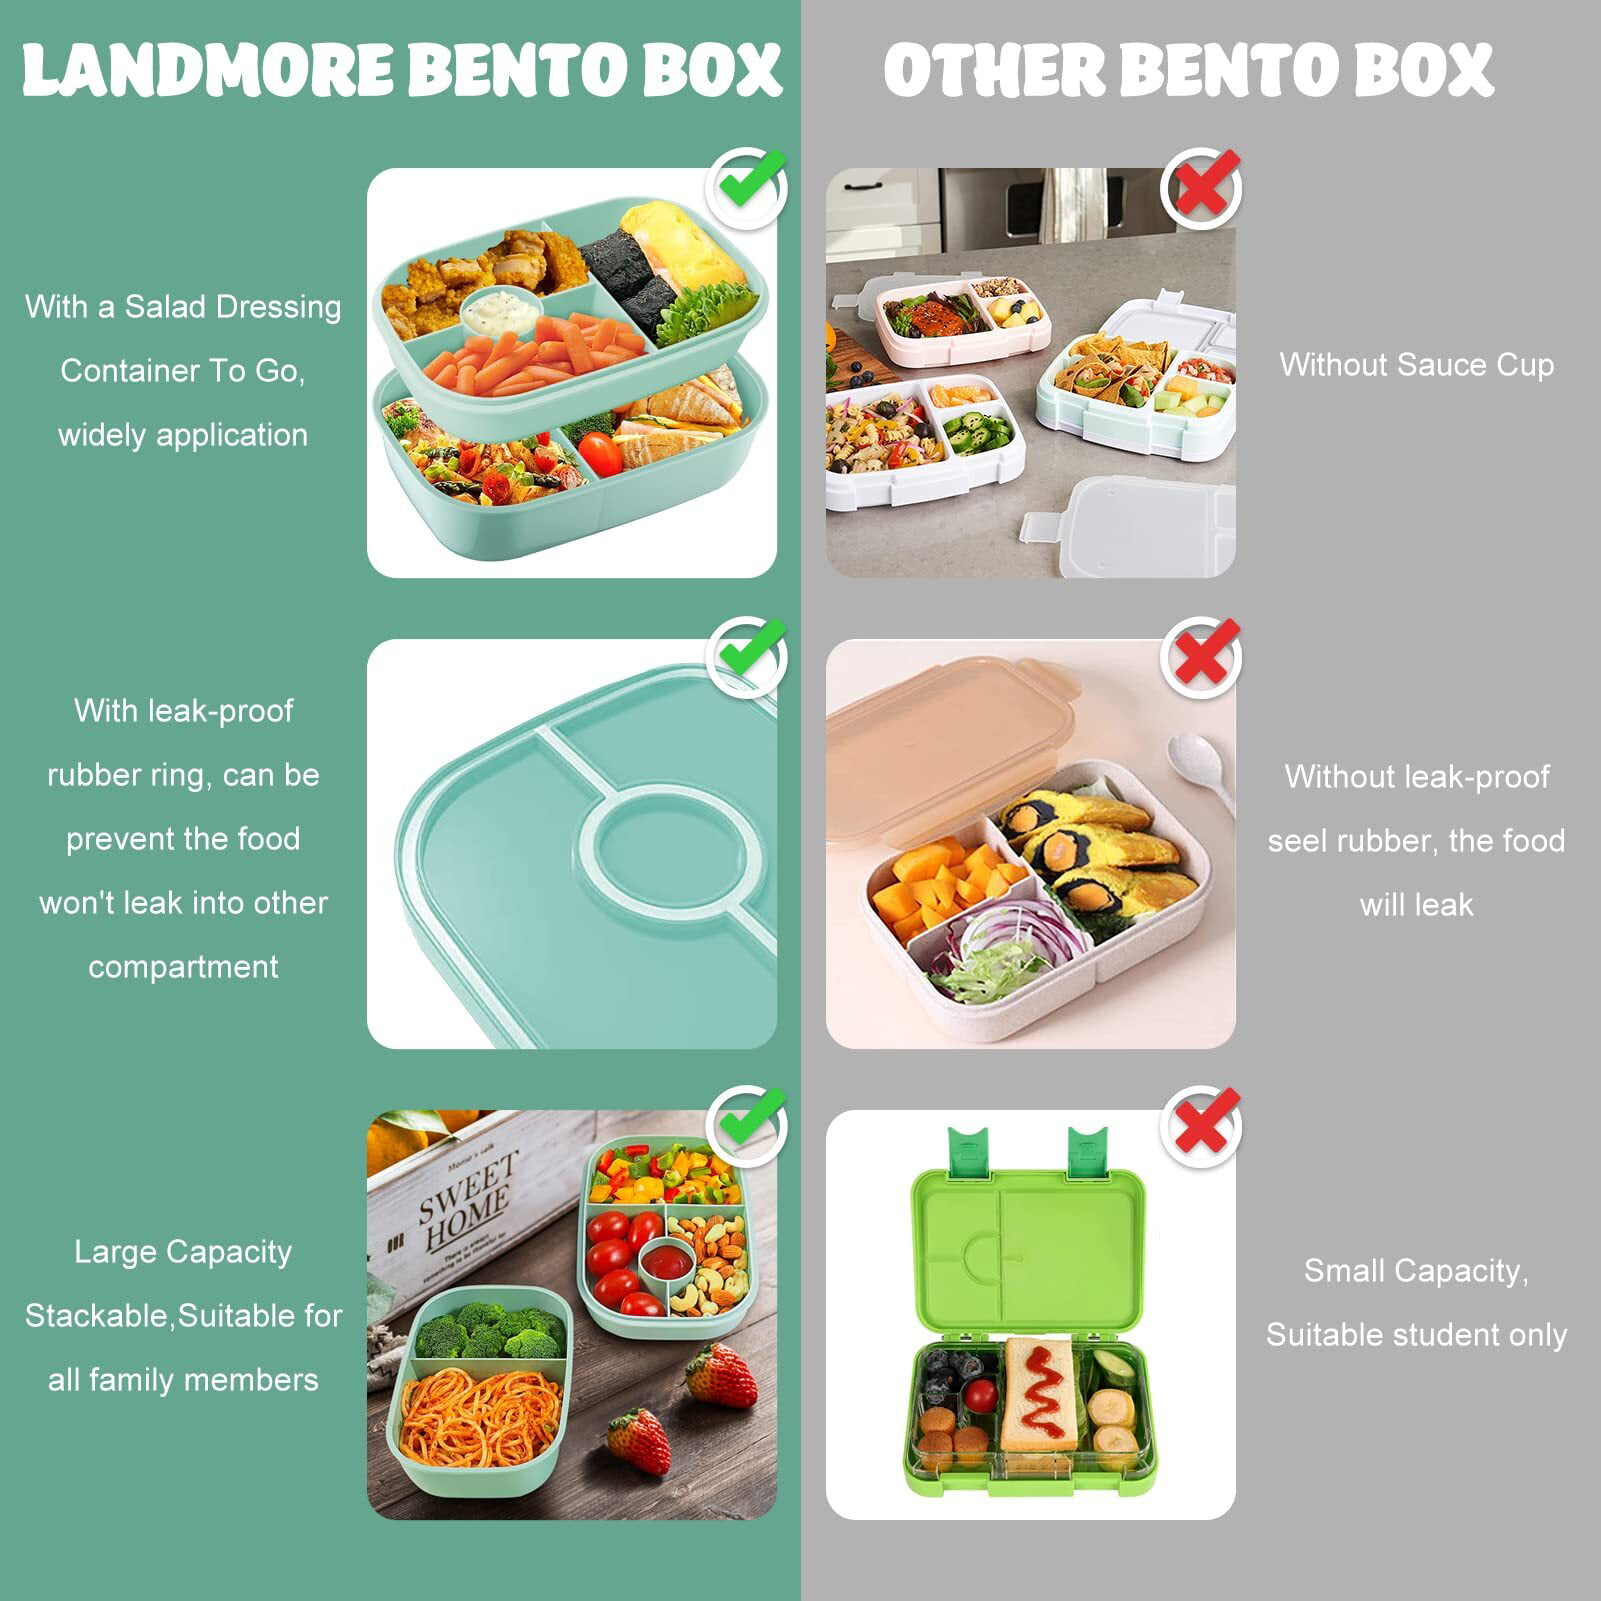 Stainless Steel Bento Box, Stackable Bento Box Adult Lunch Box, 1500ML-6  Compartment Bento Lunch Box for Adults, BPA-Free Lunch Box Containers with  Utensil for On-the-Go Balanced Eating.. ($16.99) For  USA 🇺🇸